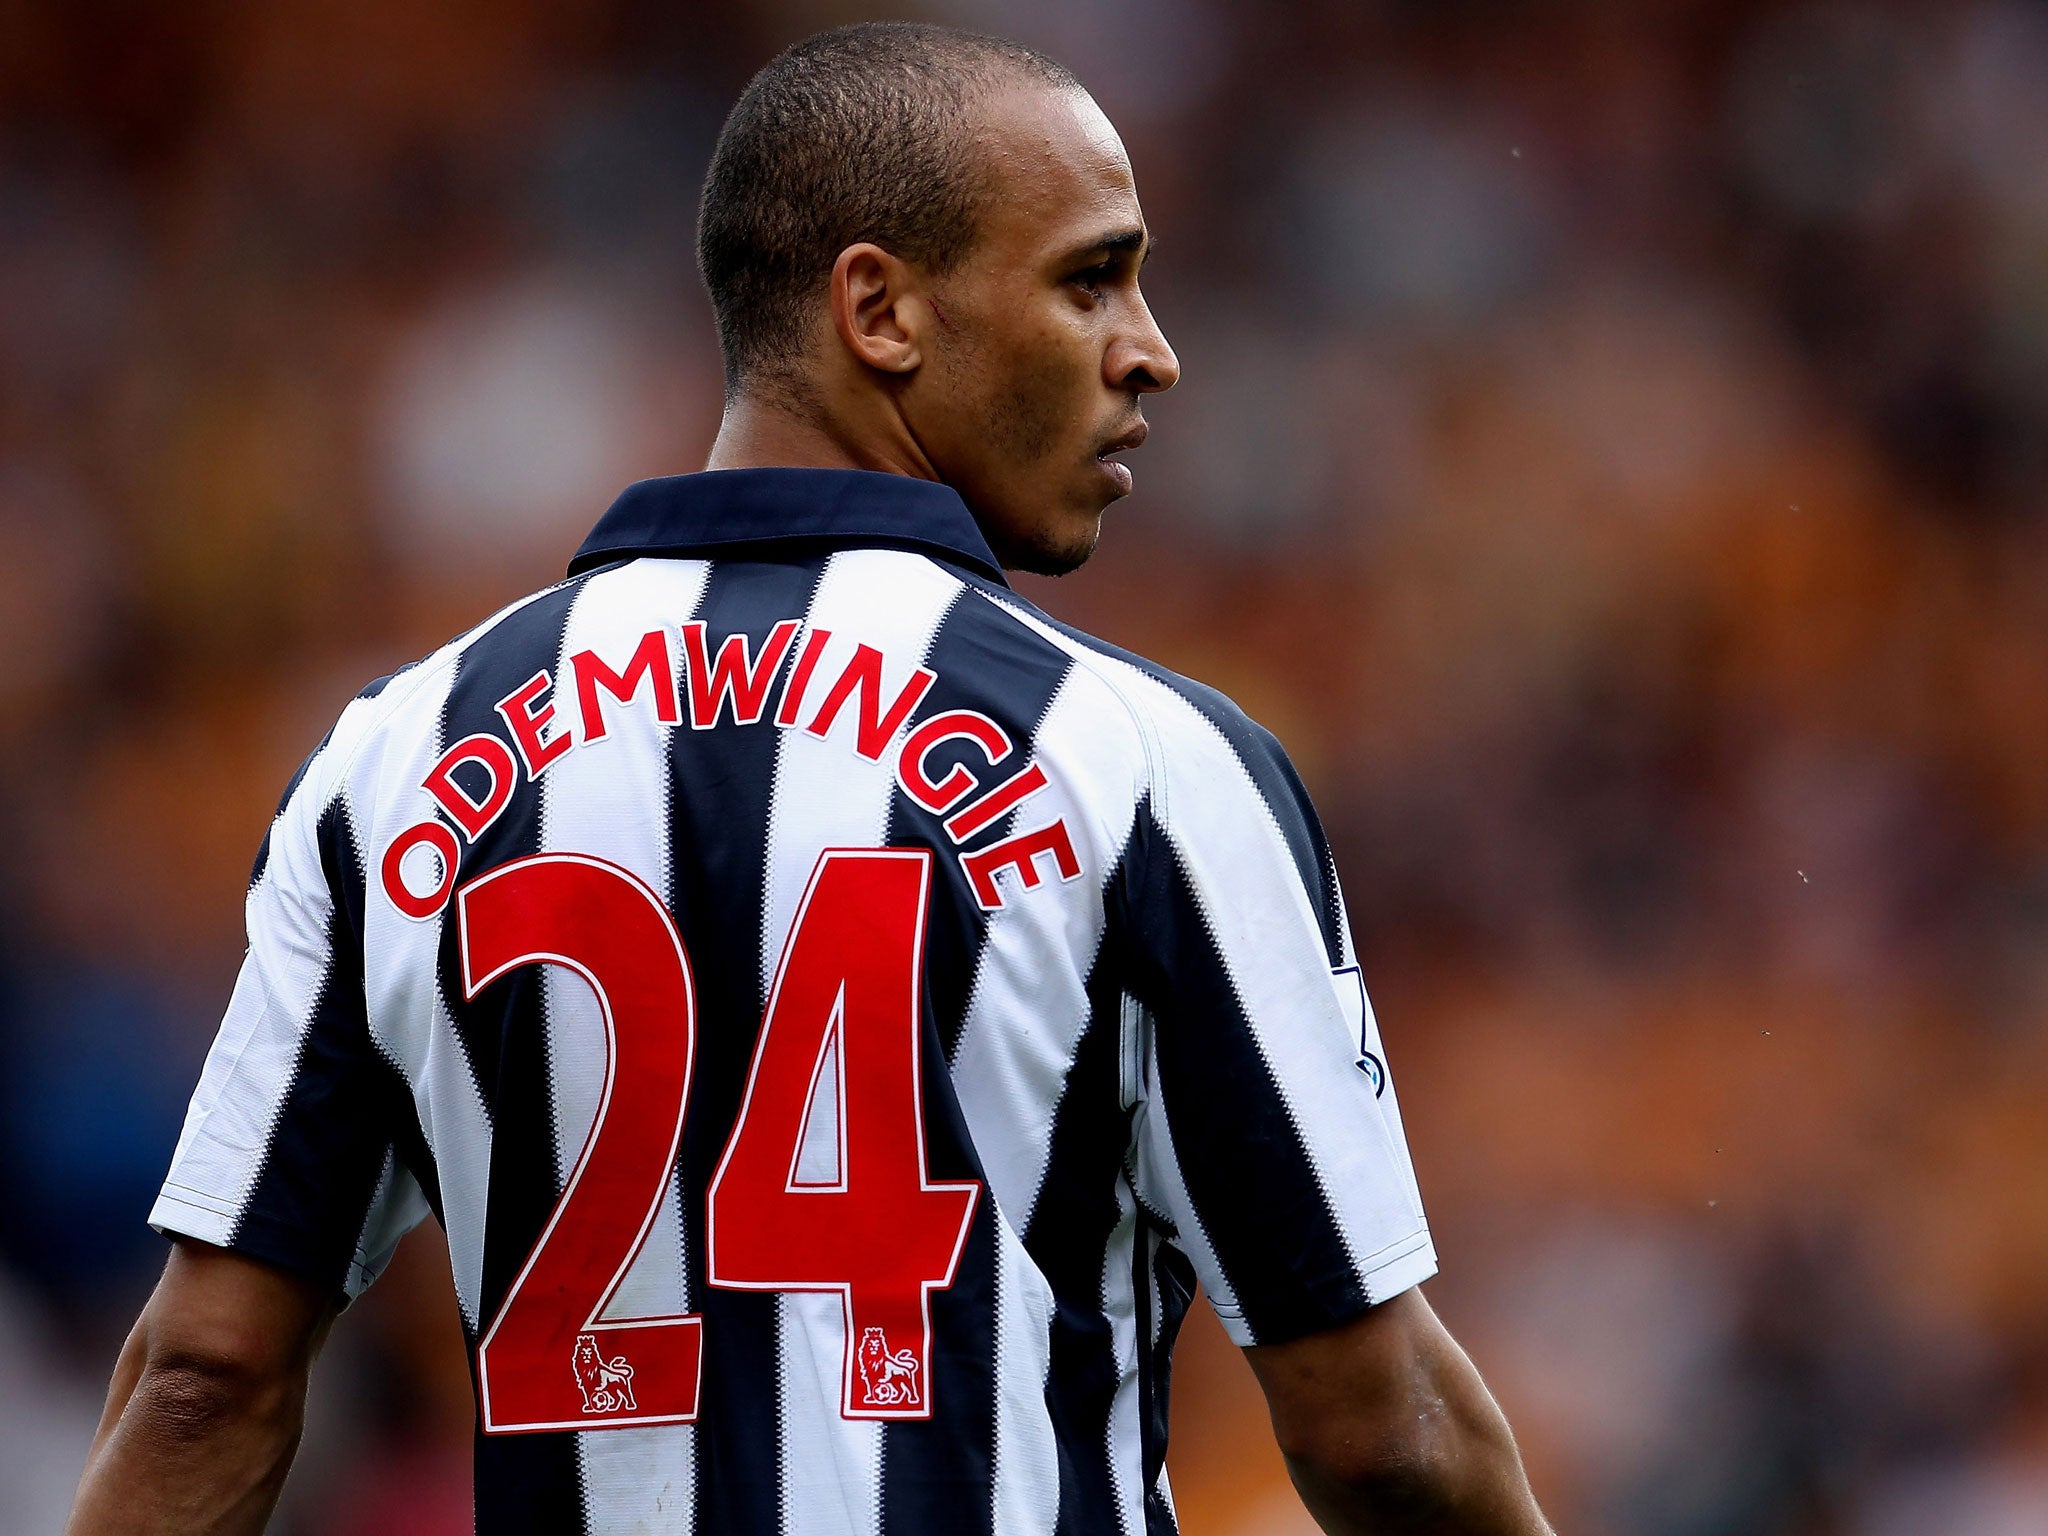 Odemwingie arrived at Loftus Road on Thursday in buoyant mood but was soon told to leave